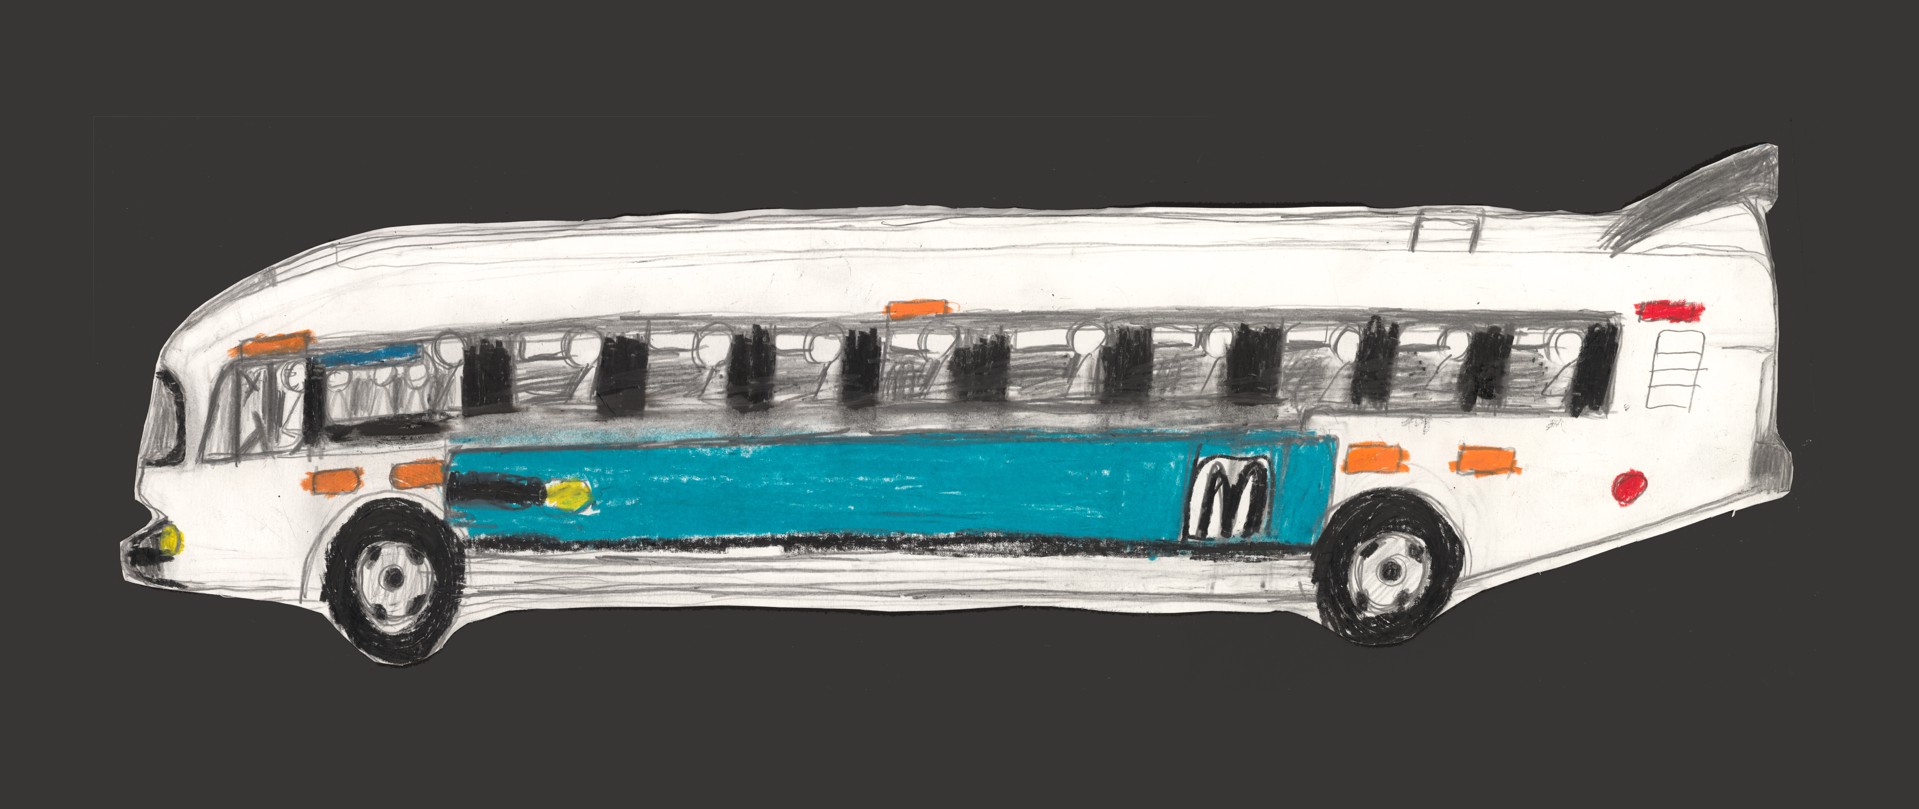 Bus with Teal Stripe by Michael Haynes